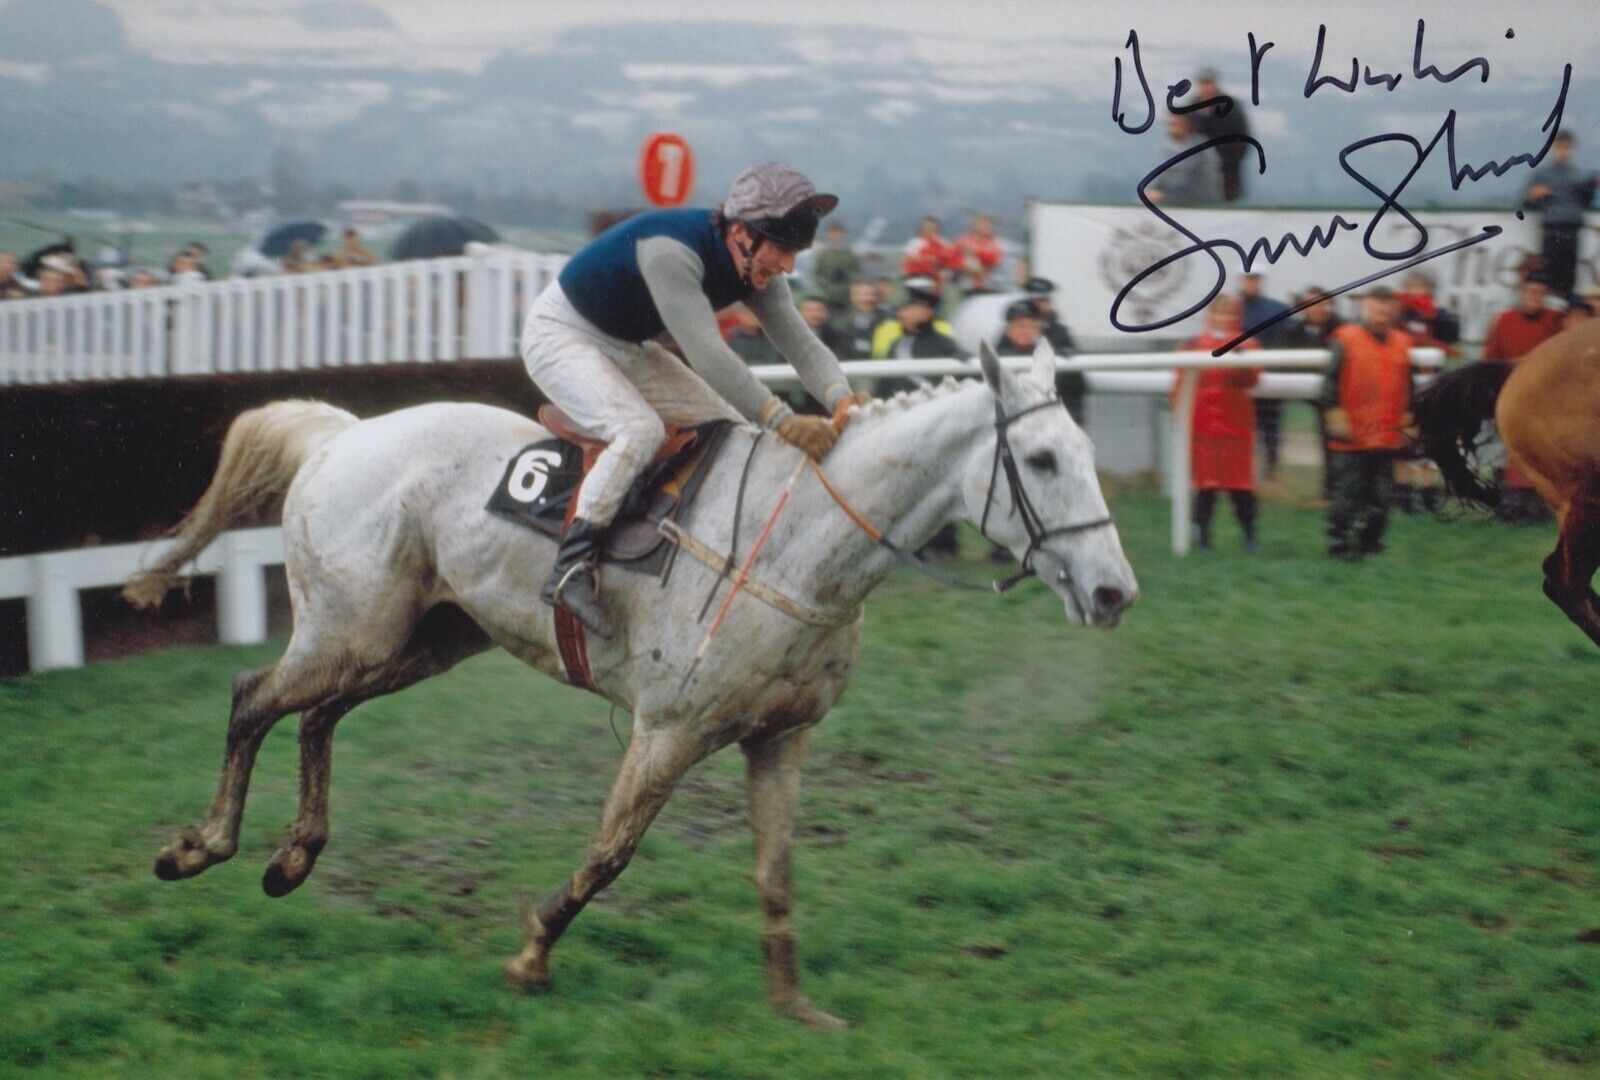 SIMON SHERWOOD HAND SIGNED 12X8 Photo Poster painting DESERT ORCHID HORSE RACING AUTOGRAPH 5